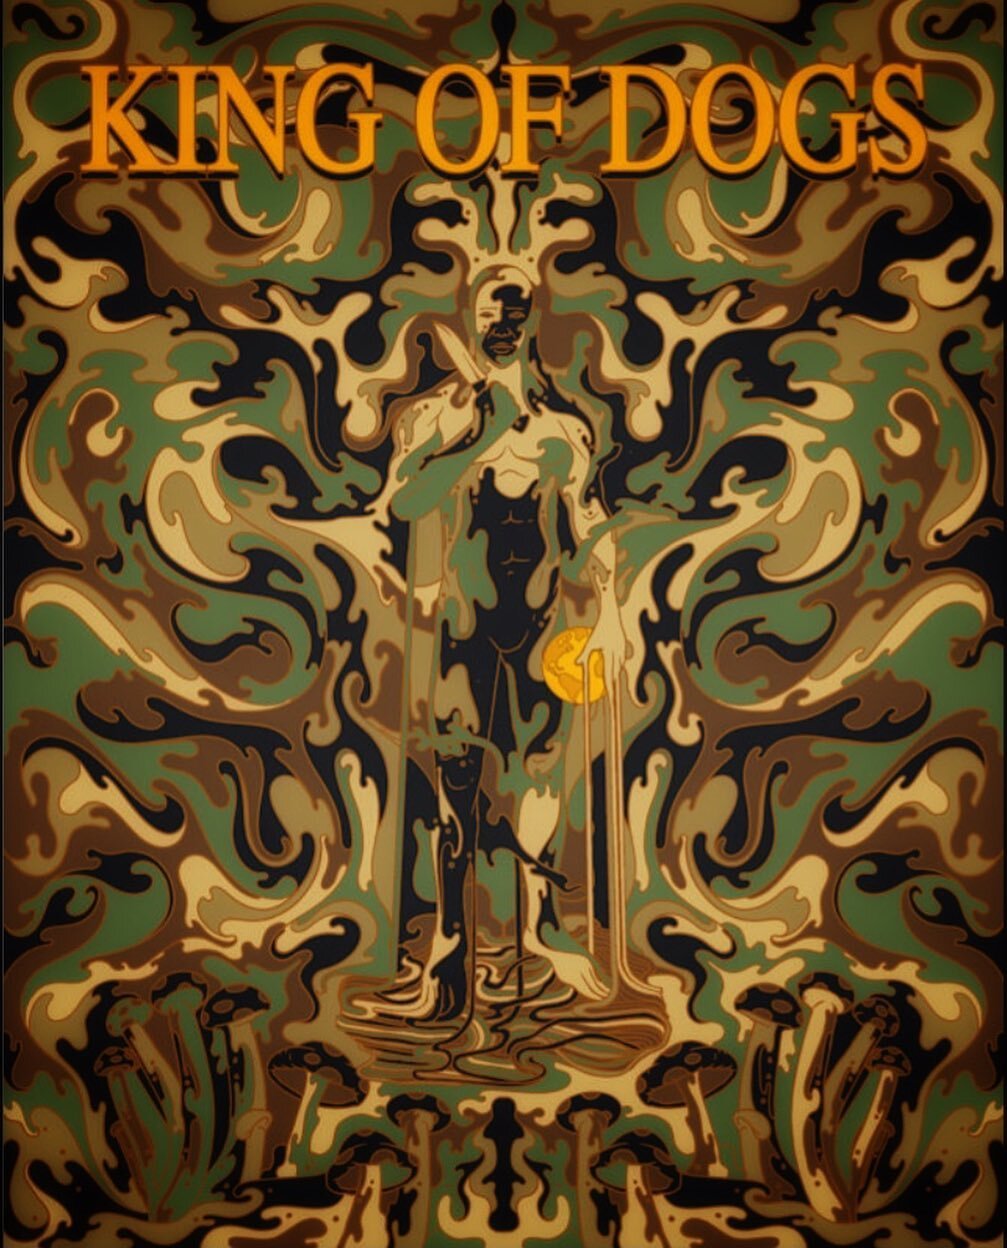 Men of God and men of war have strange affinities. &mdash;Blood Meridian

-
#kingofdogs #literaryfiction #rhodesia #panentheism  #theory #allmomentscollapsetoone #preapocalypticfiction #4gw #hunting #novel #collapse #dogsofinstagram #survival  #logos